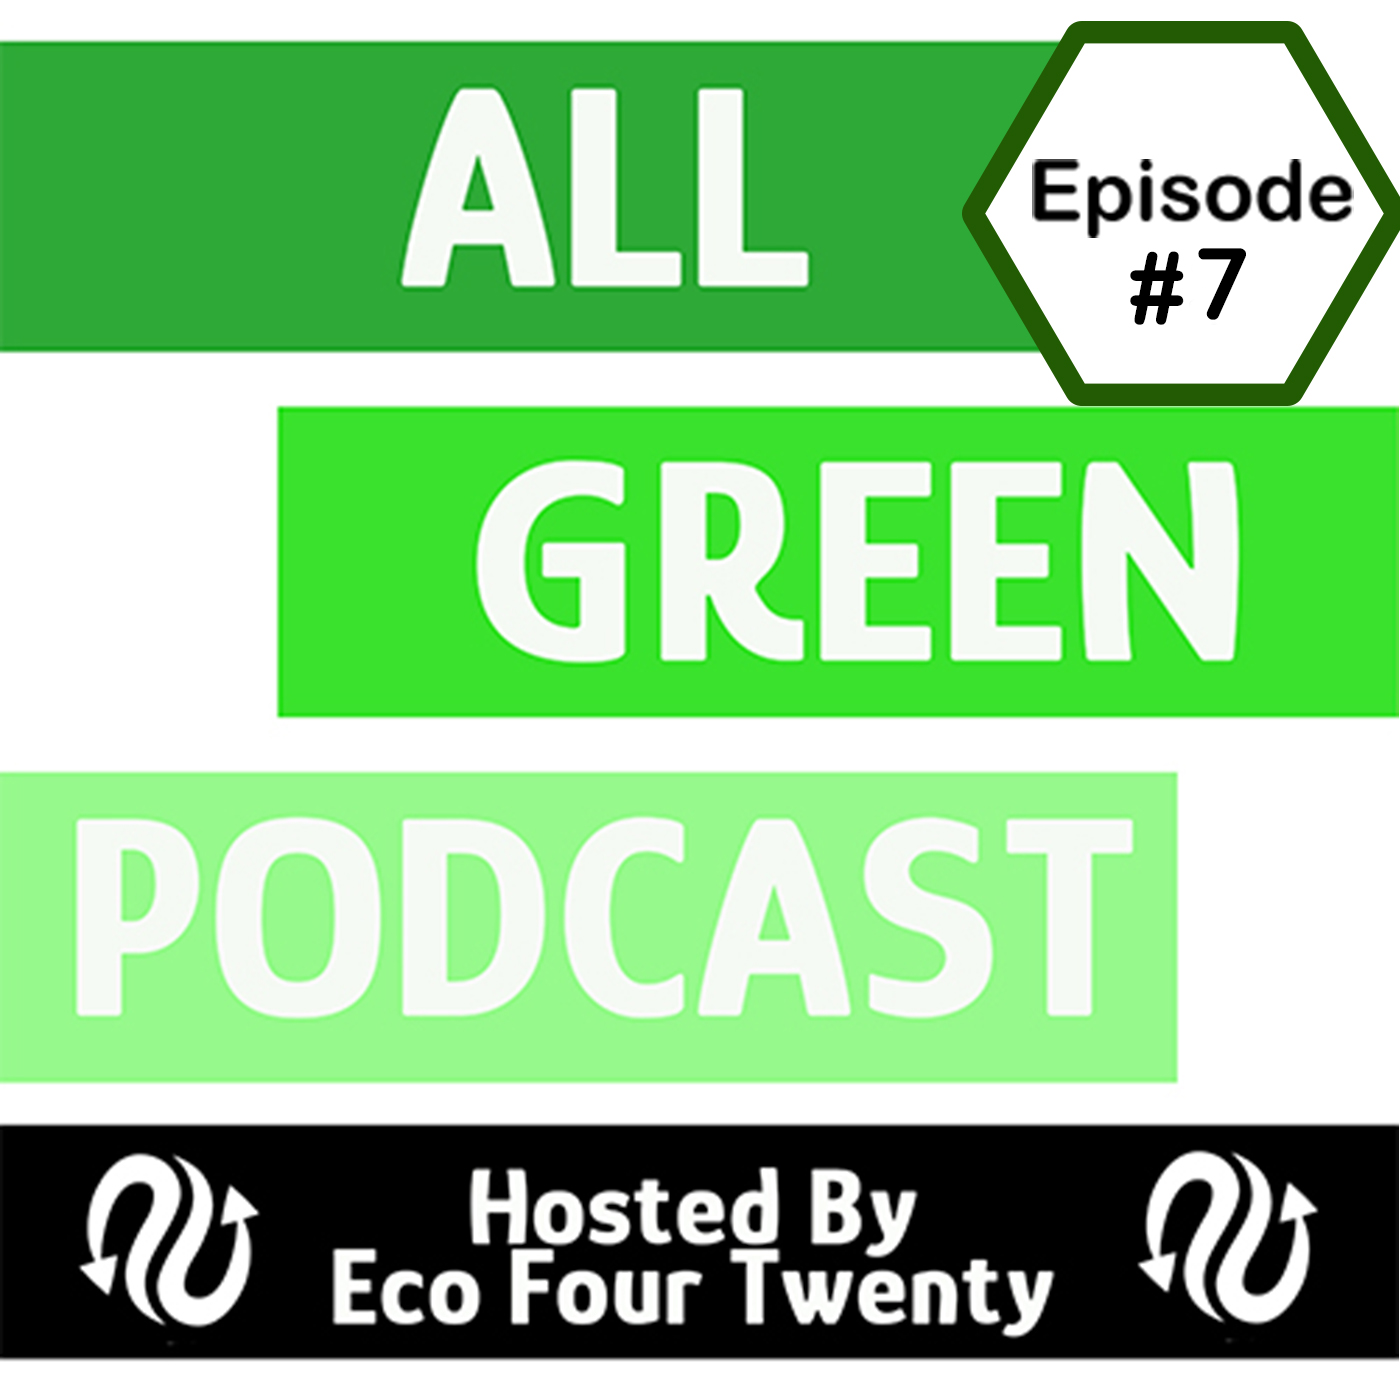 All Green Podcast Ep.7- Regulated Tourism; Interview with Jennifer Mason from JLM Strategic Marketing and New Heights Summit